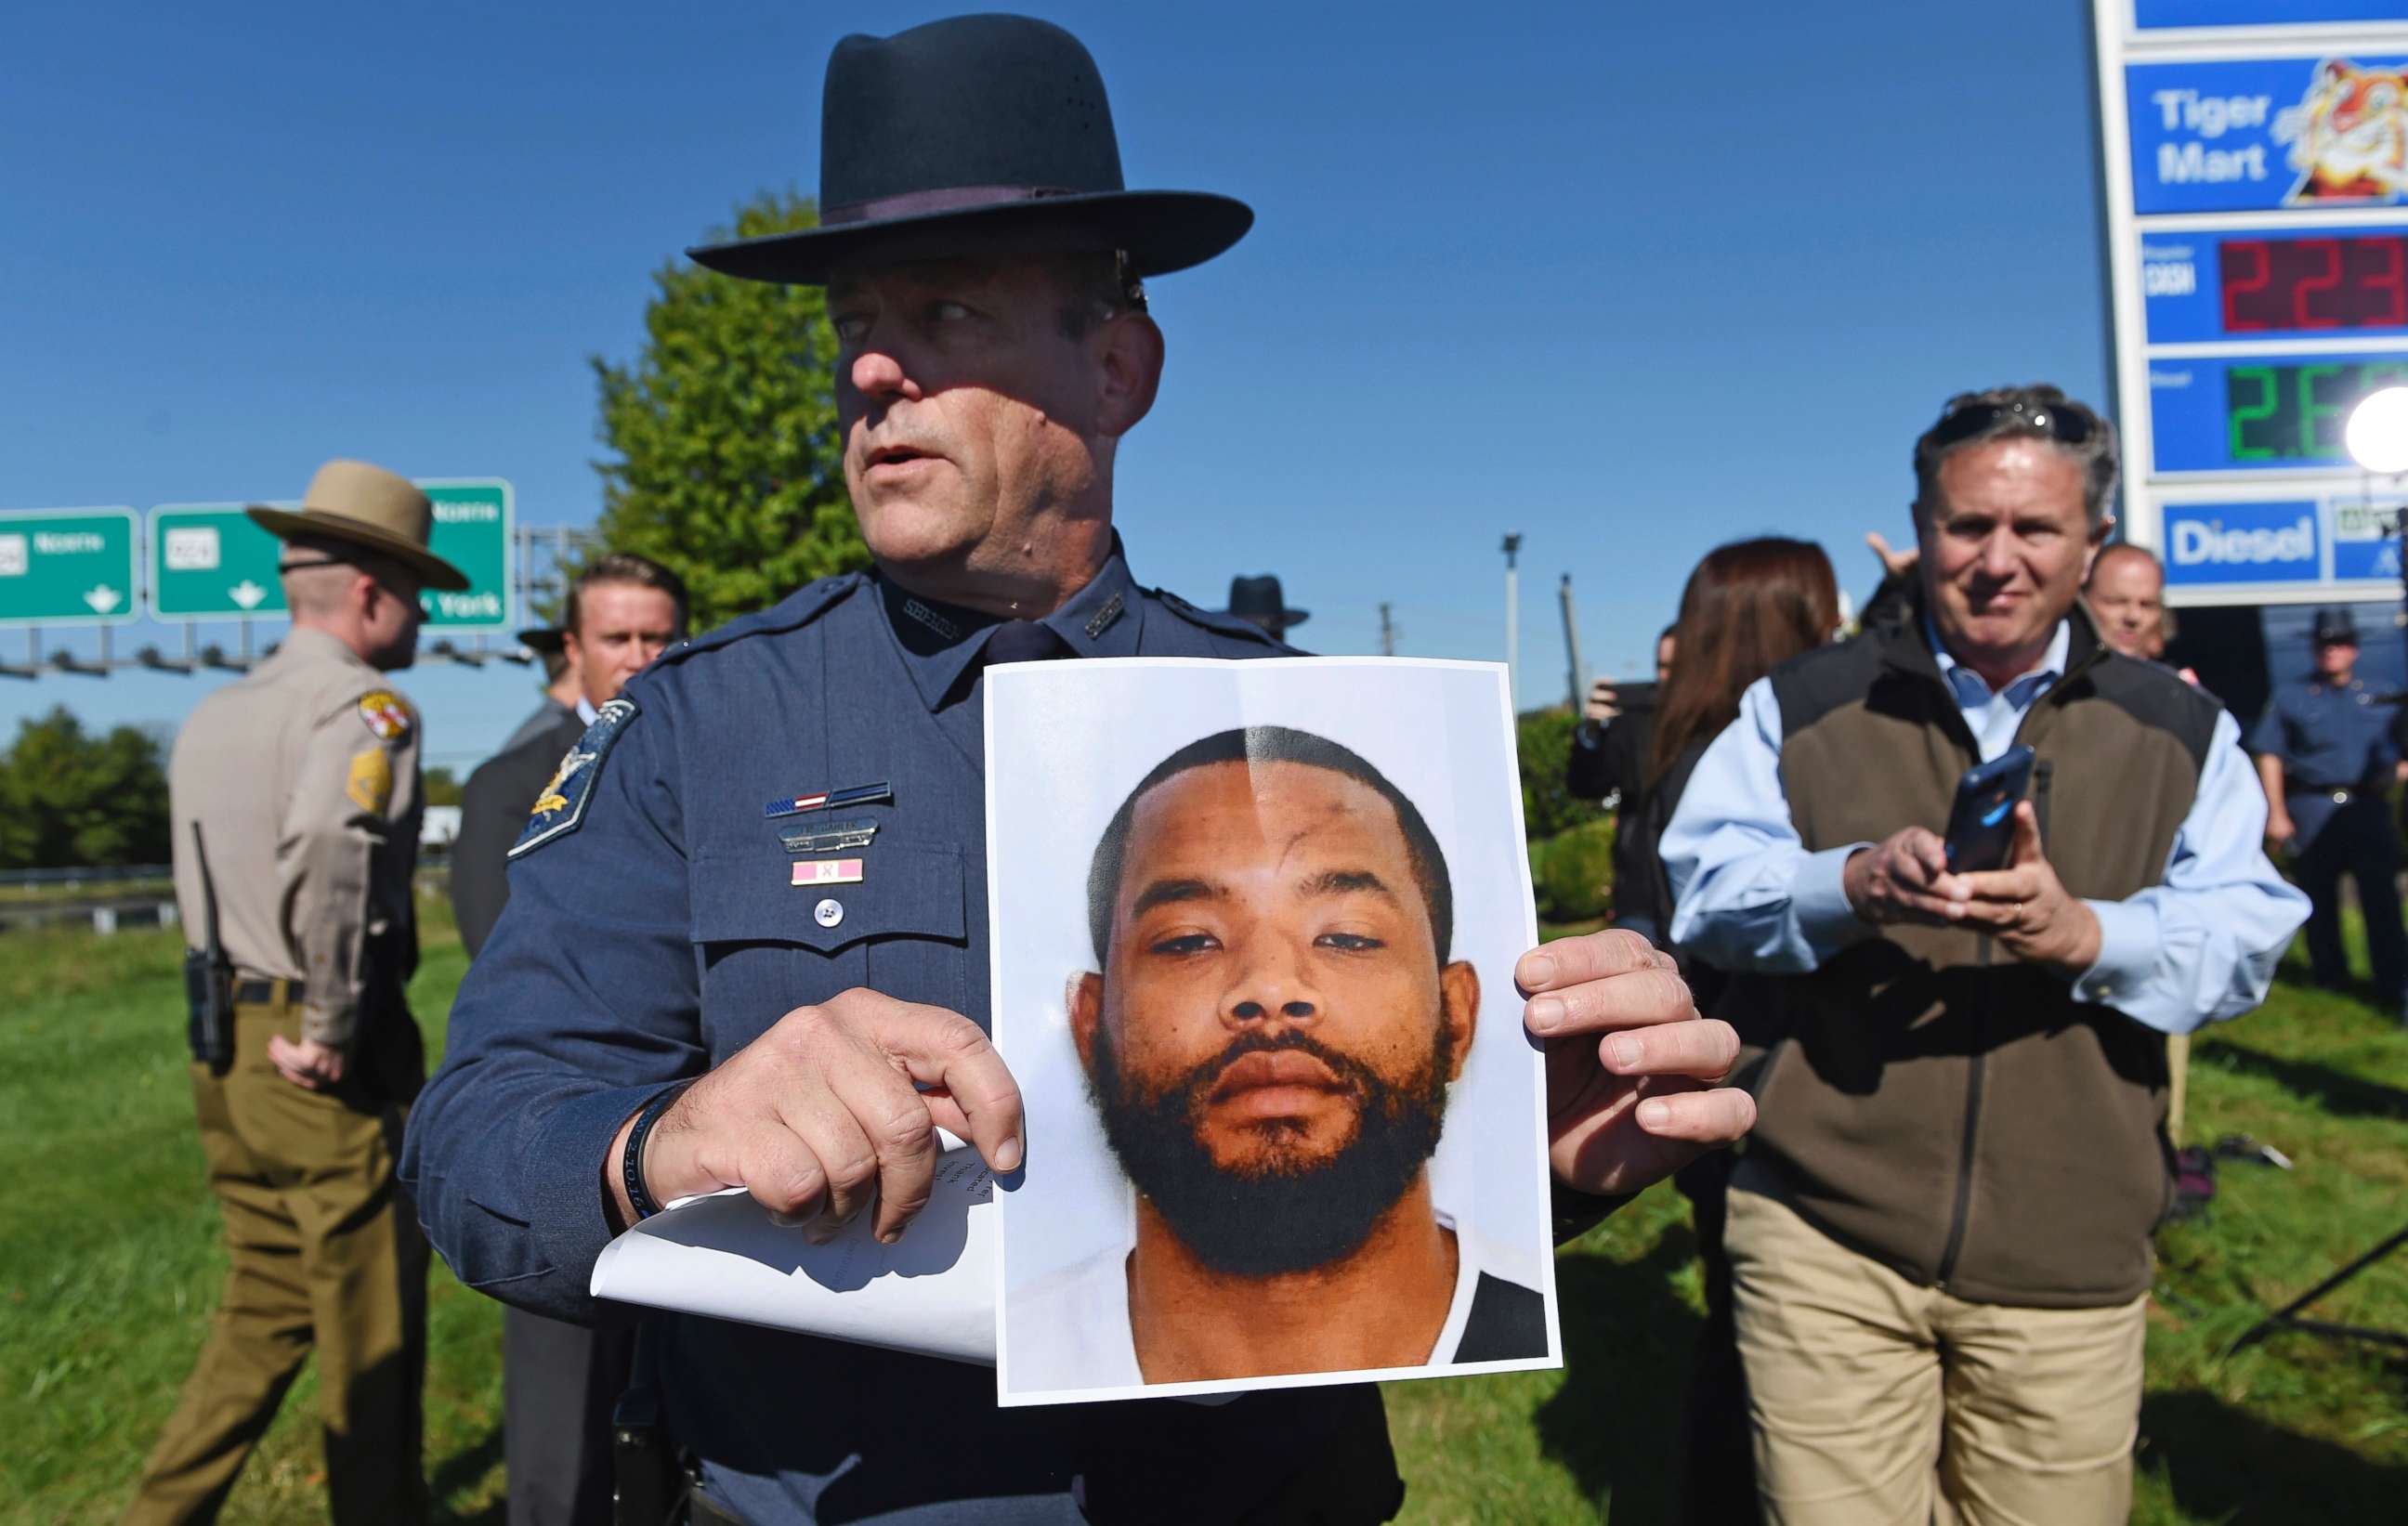 PHOTO: Harford County Sheriff Jeffrey Gahler shows a picture of suspect Radee Labeeb Prince, 37, after news conference